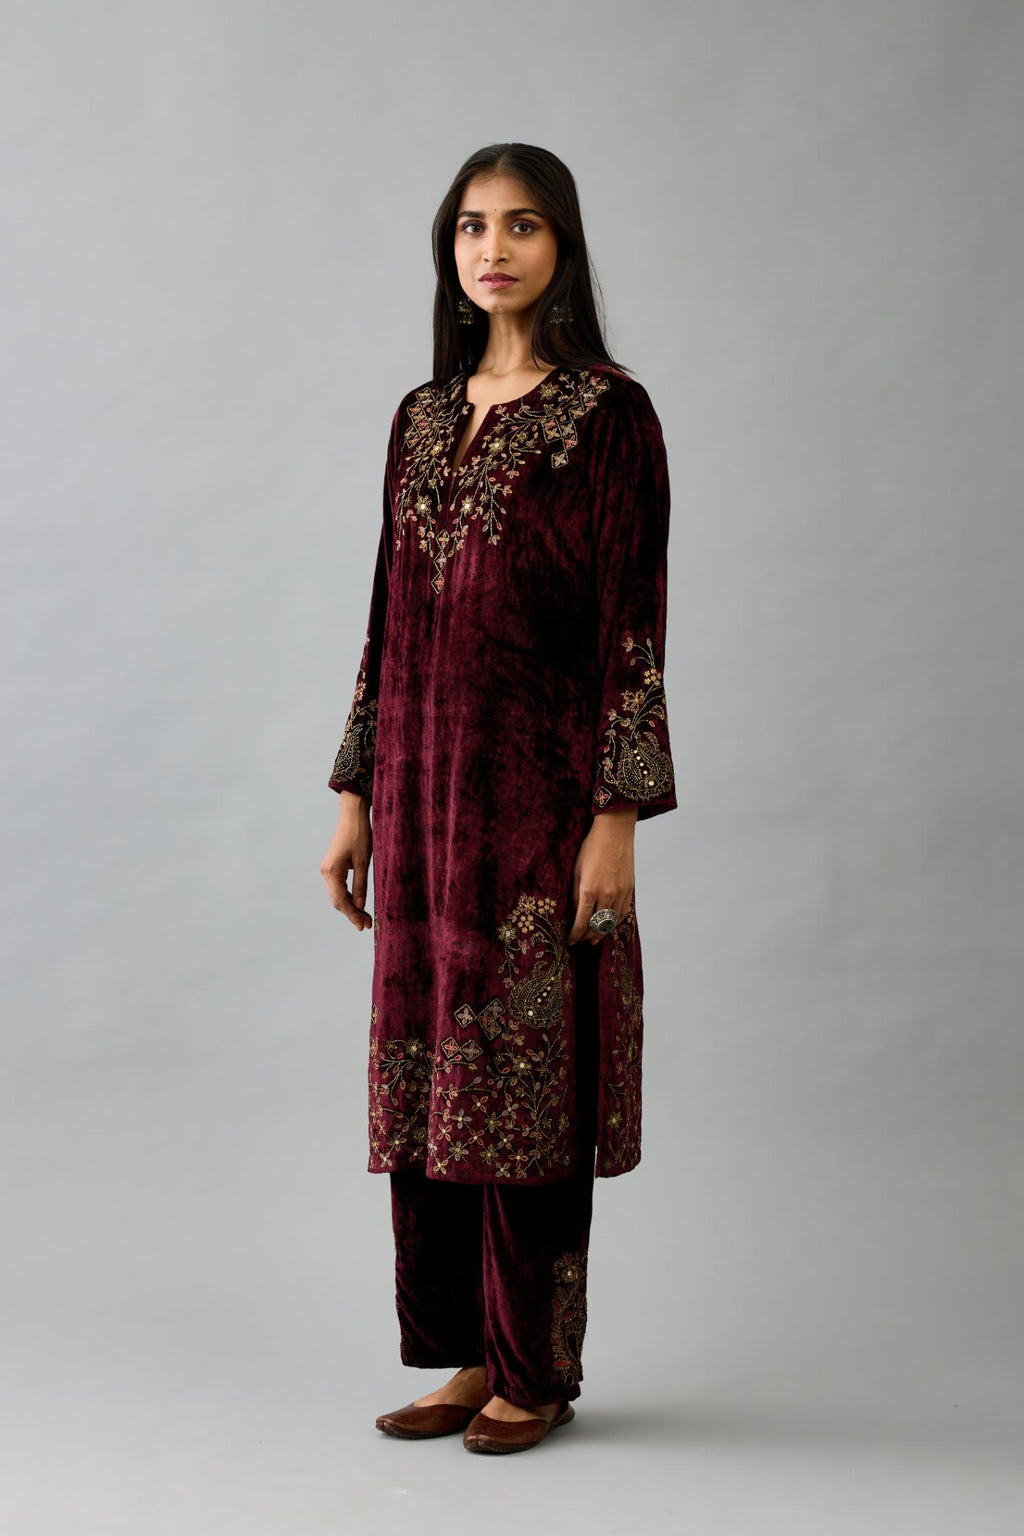 Maroon silk velvet straight mid length kurta with all-over hand block print, highlighted with beads, sequins and zari work at neck & hem.